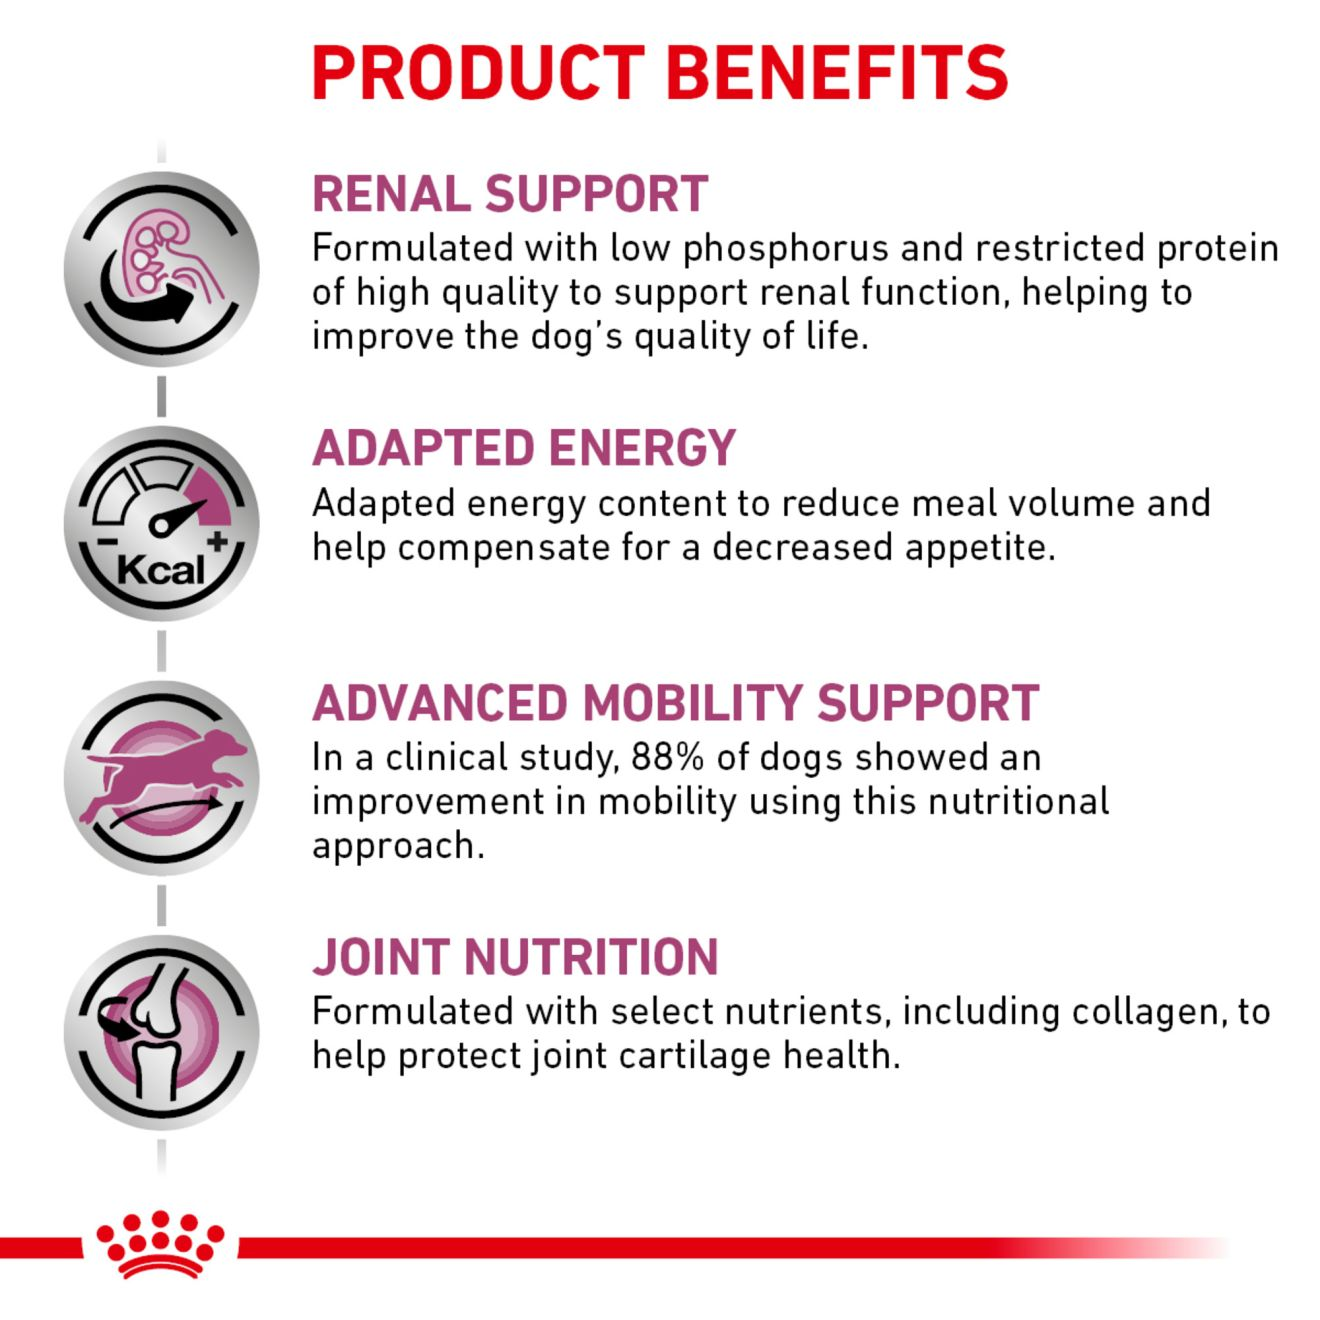 Canine Renal Support + Advanced Mobility Support | Royal Canin US